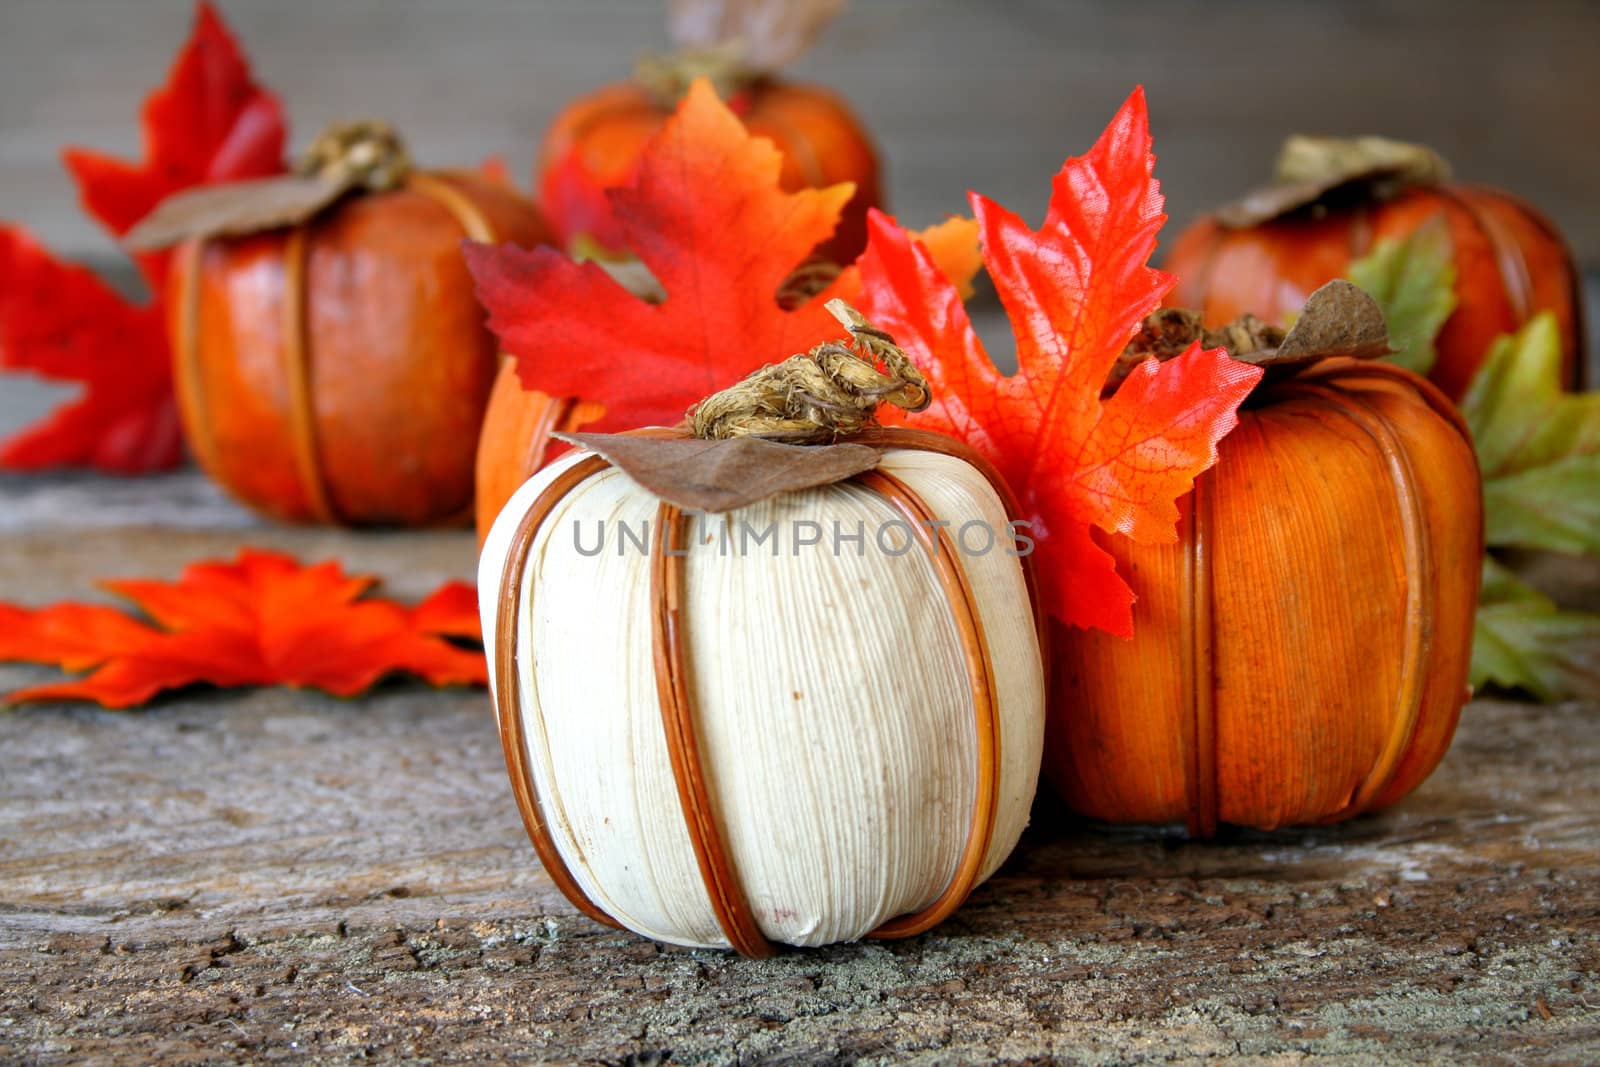 A pumpkin and fall leaf center piece for the holidays.